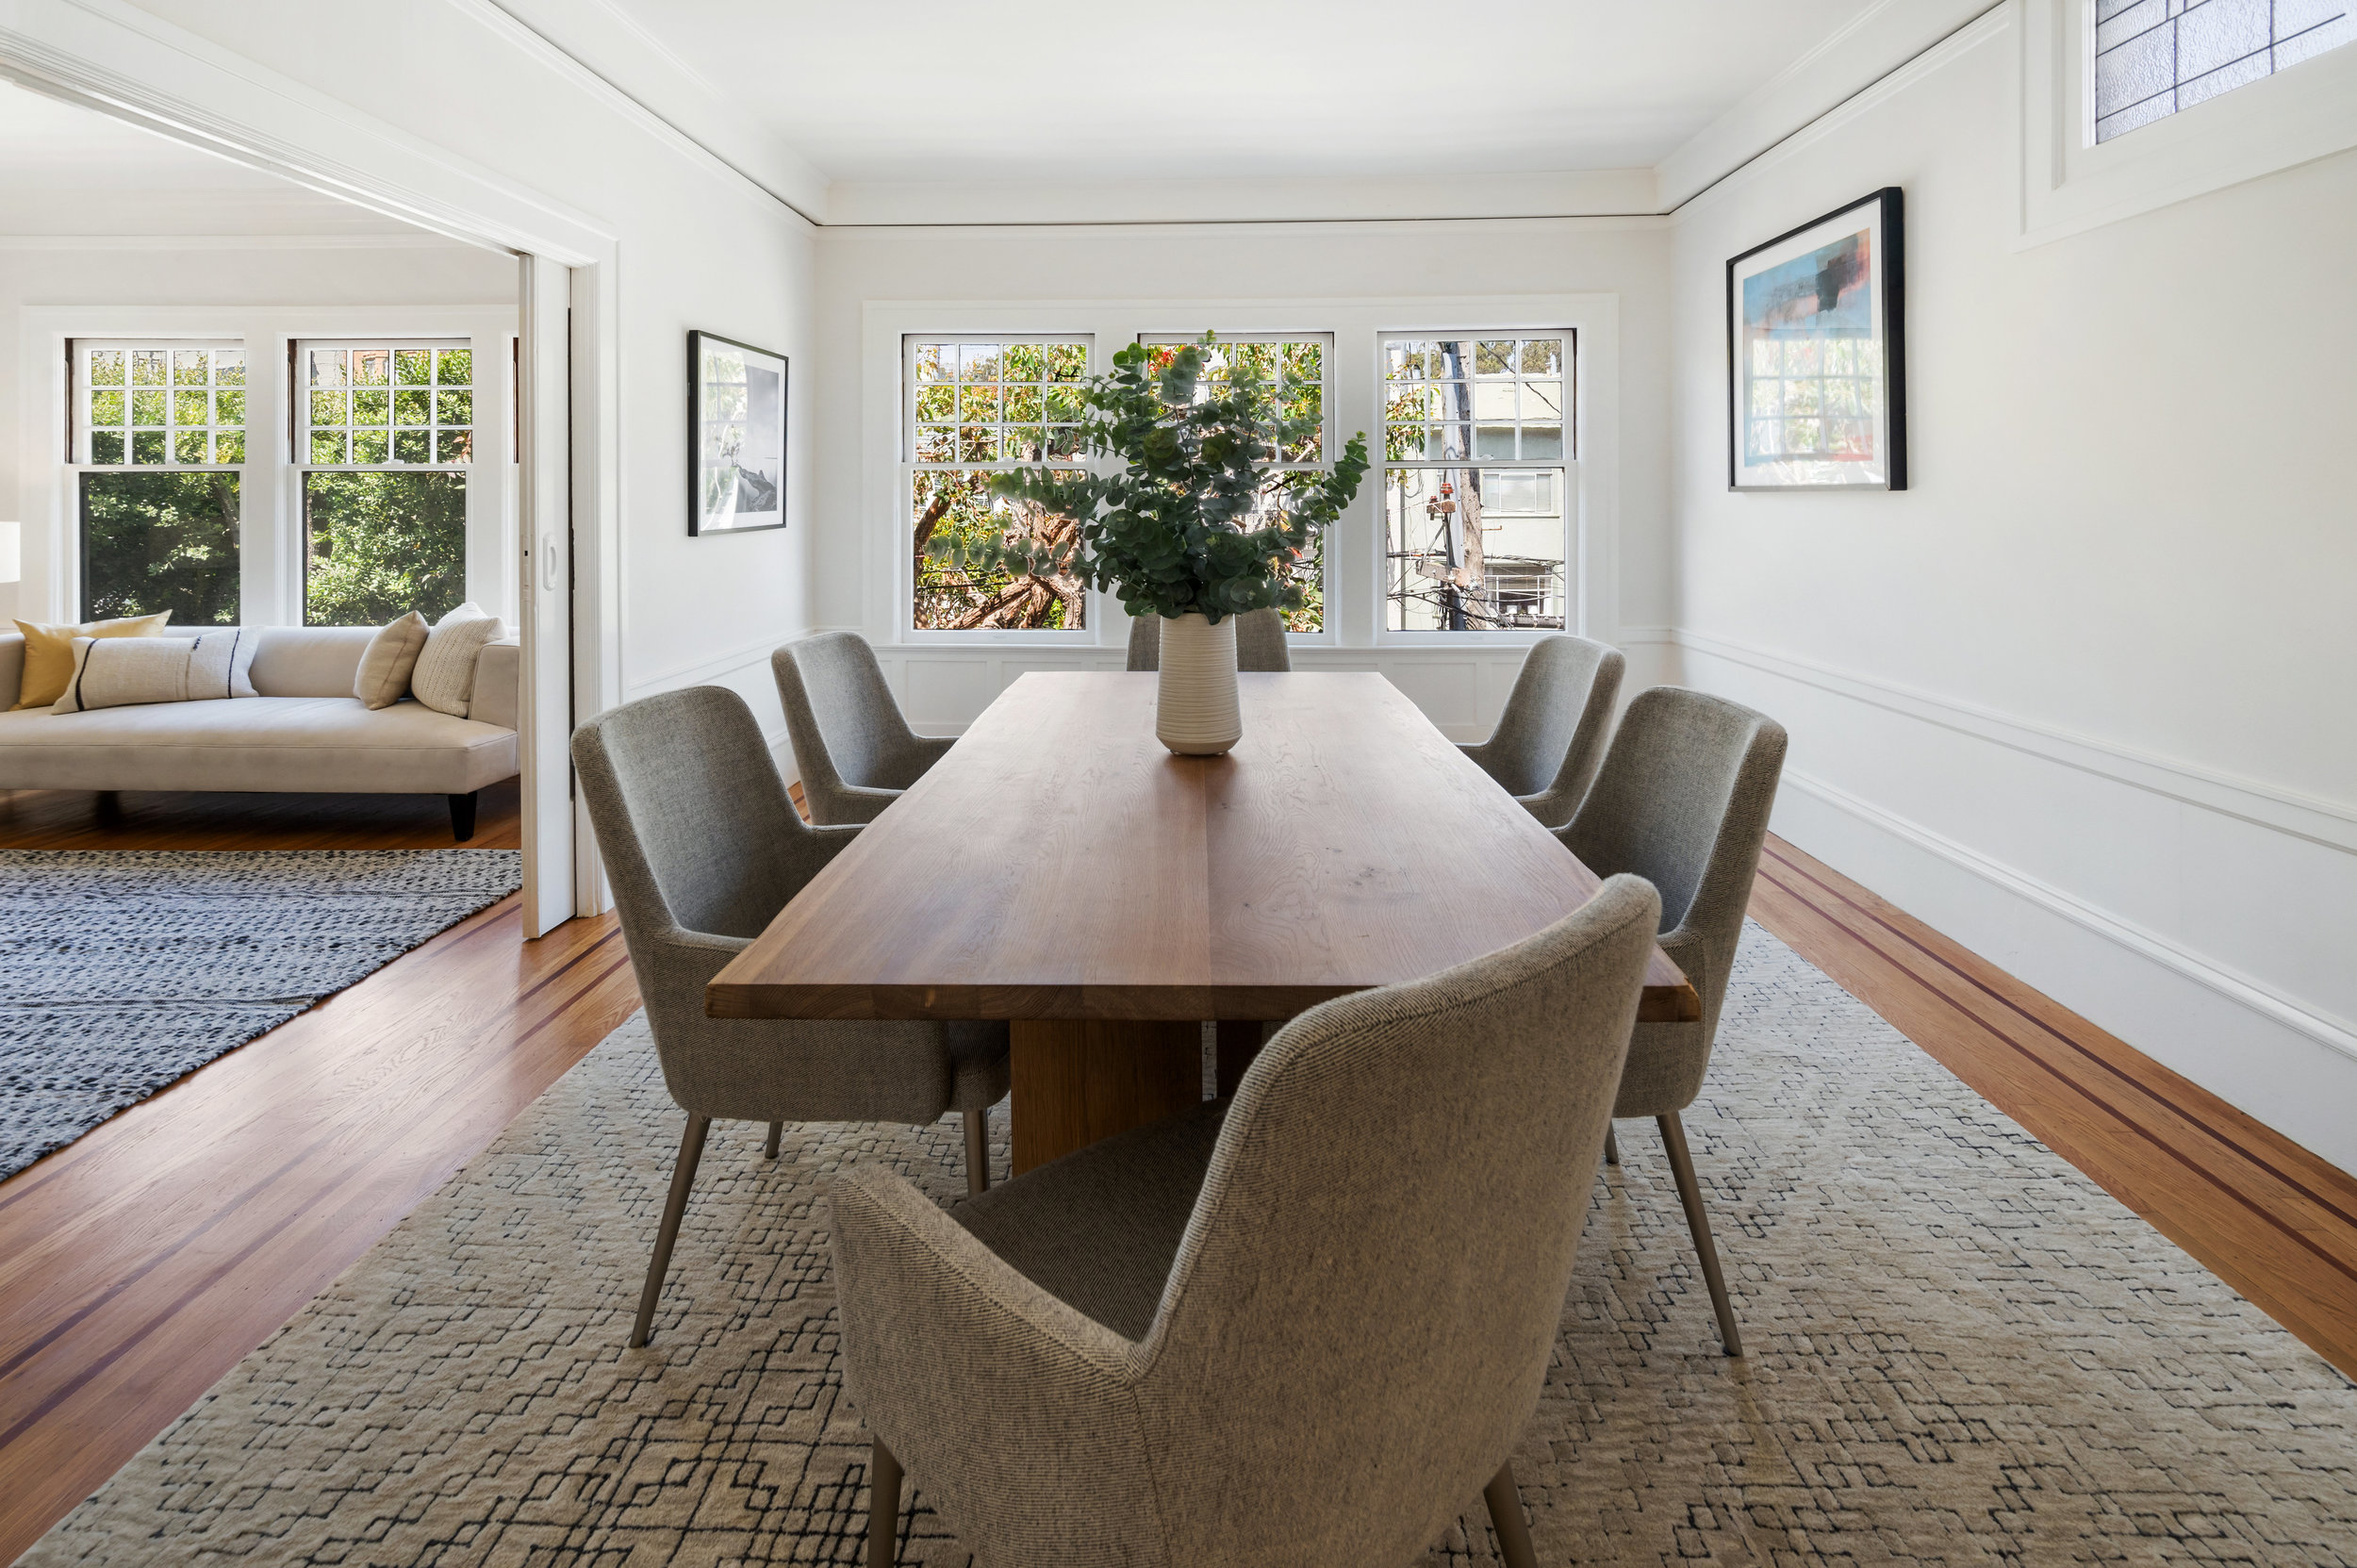 Property Photo: Dining room, featuring three large windows at one end